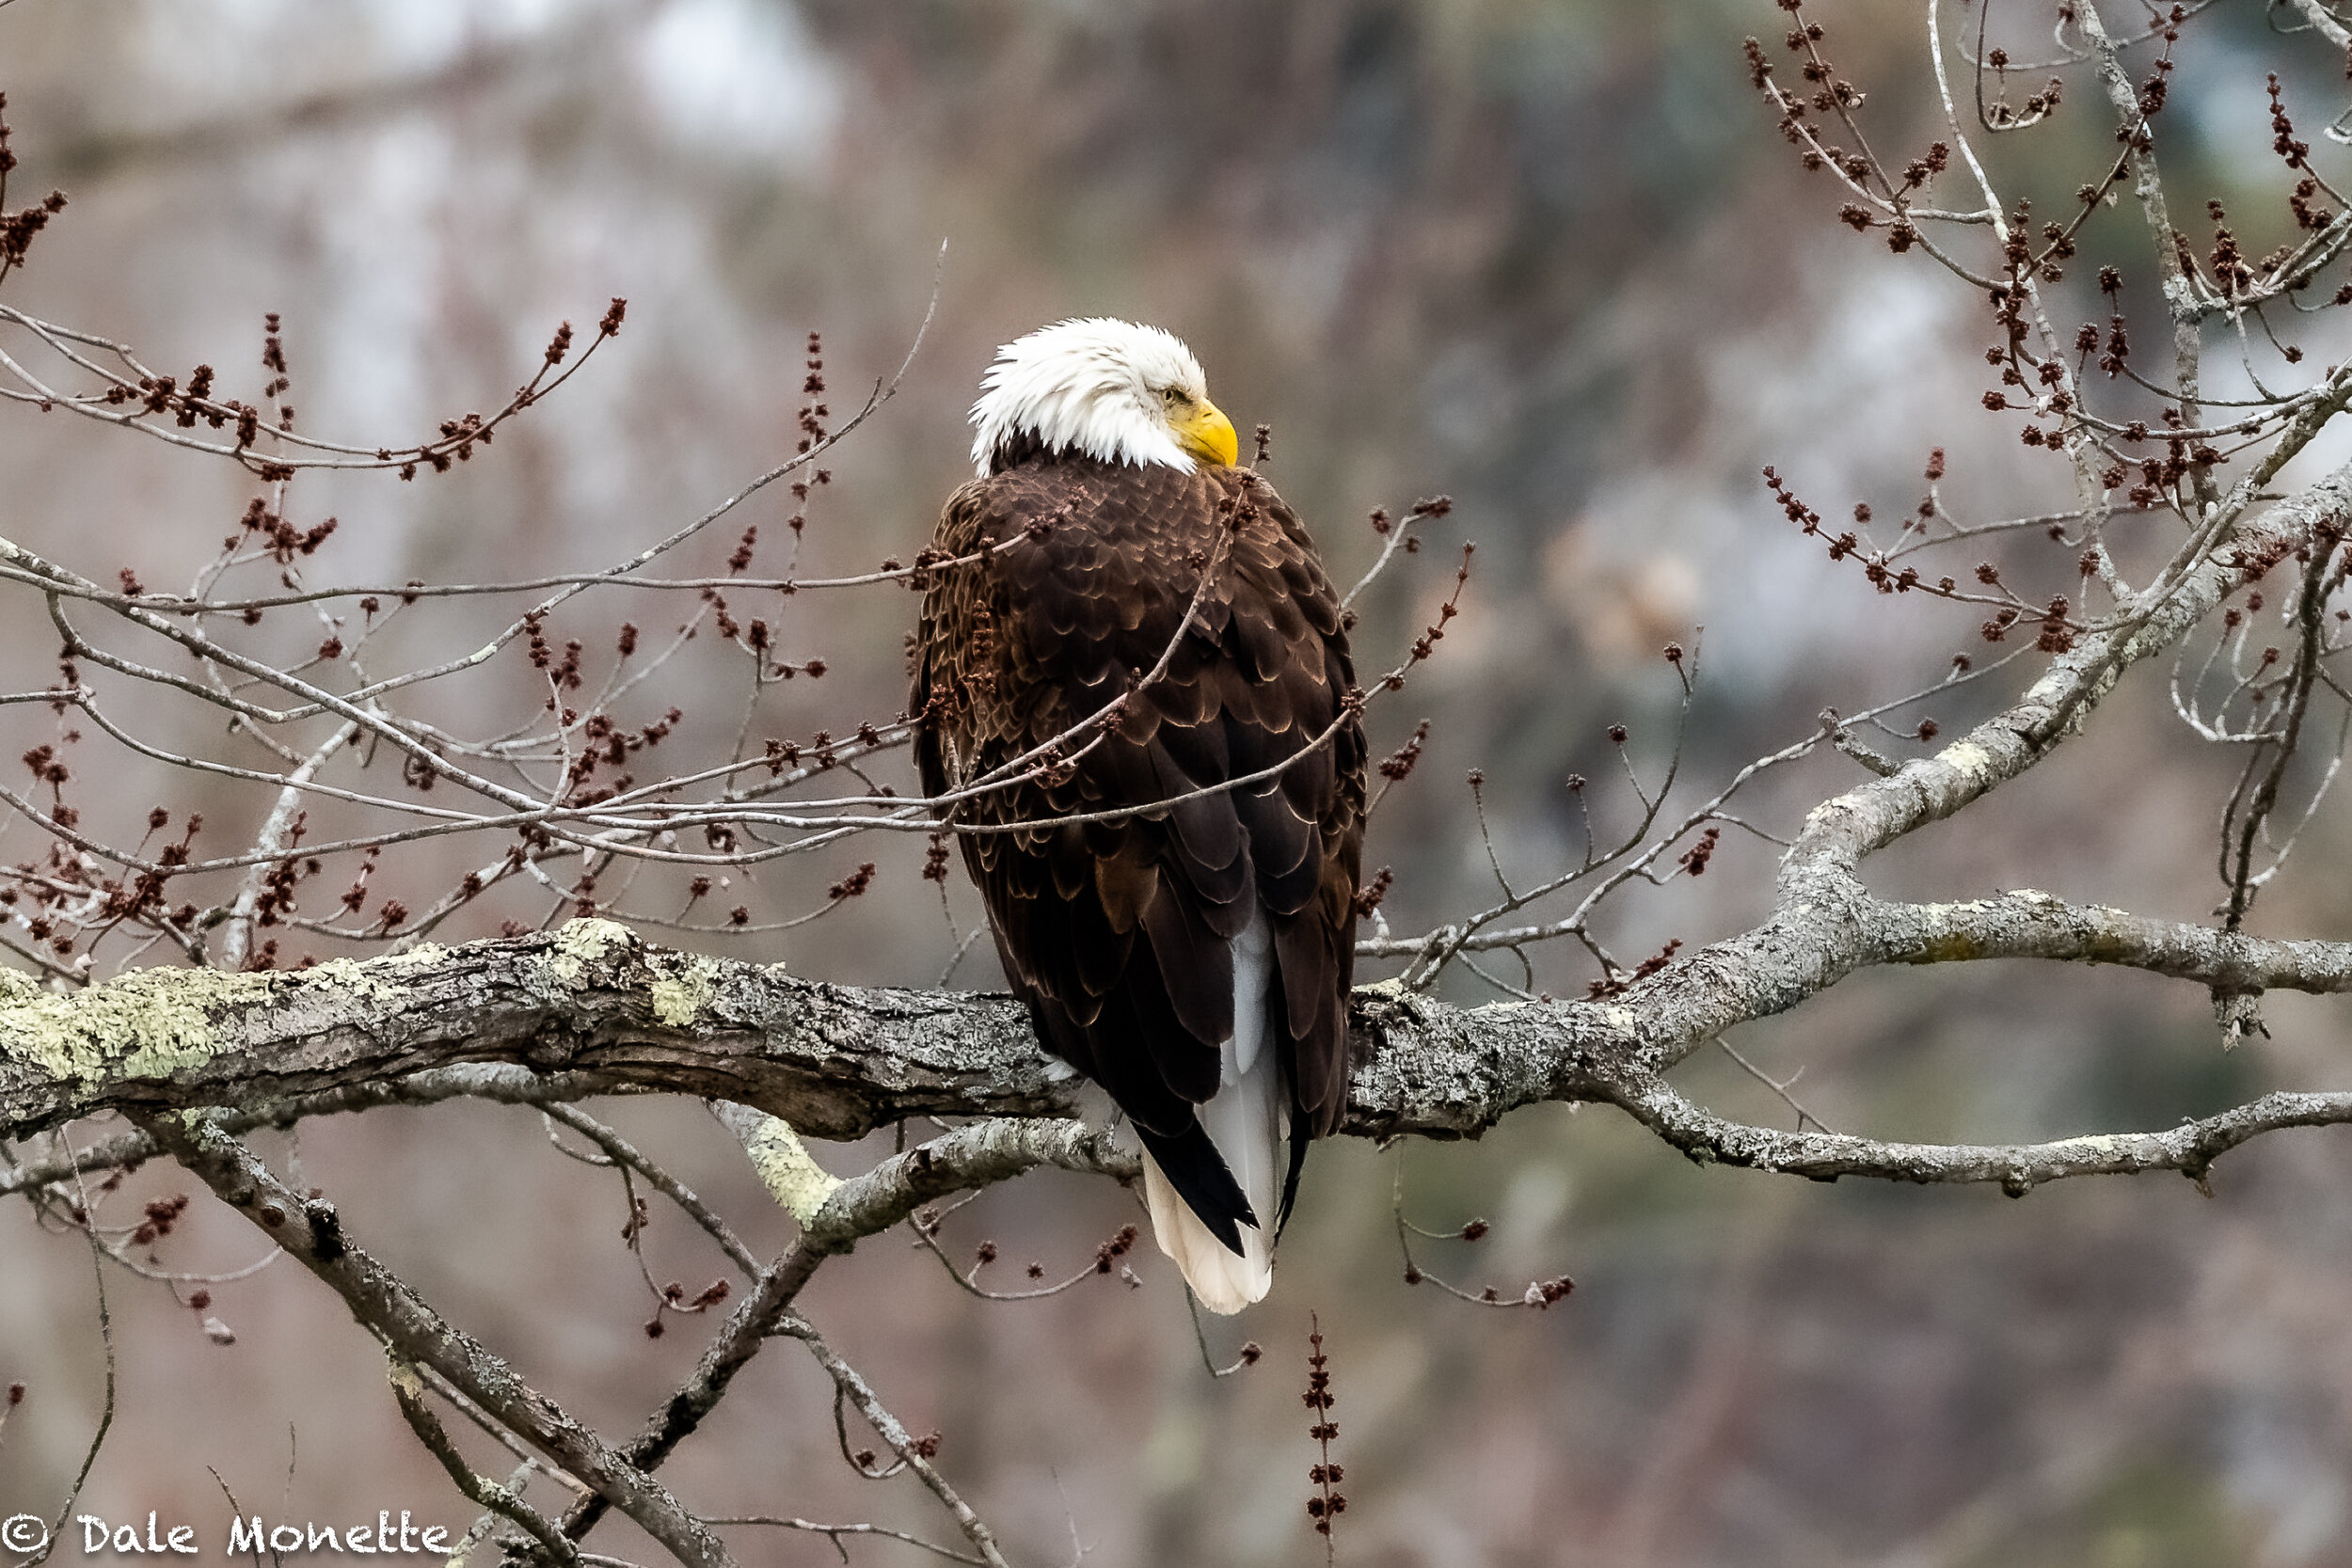   I spotted this guy this morning sitting along the CT. River in East Deerfield.  Any day I see an eagle,  its a good day. :)  